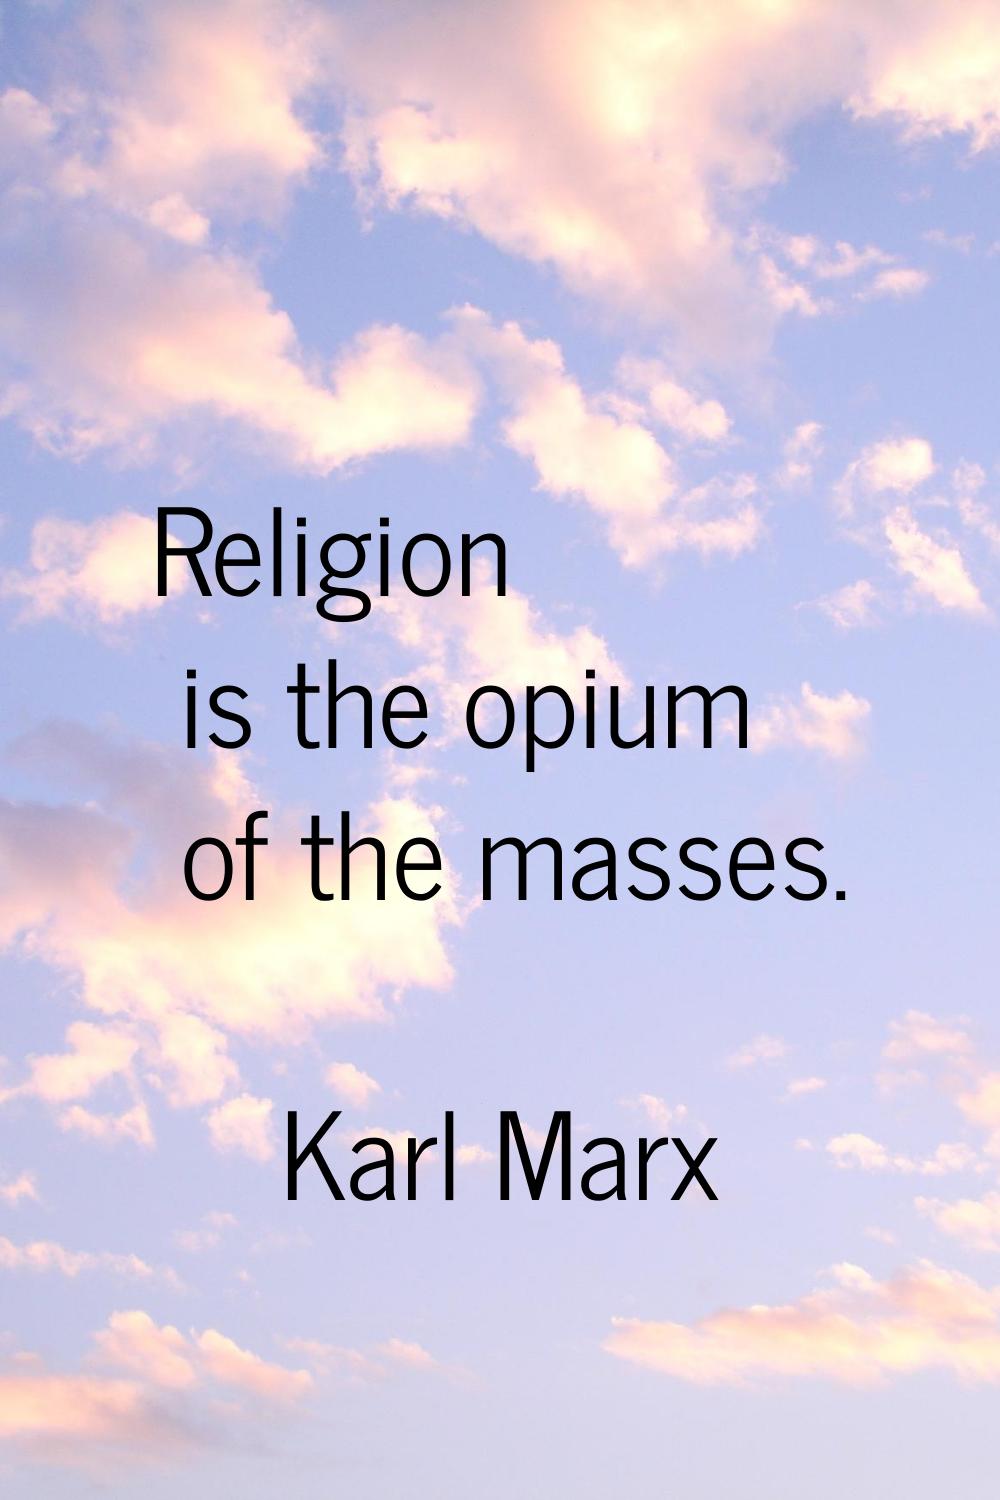 Religion is the opium of the masses.